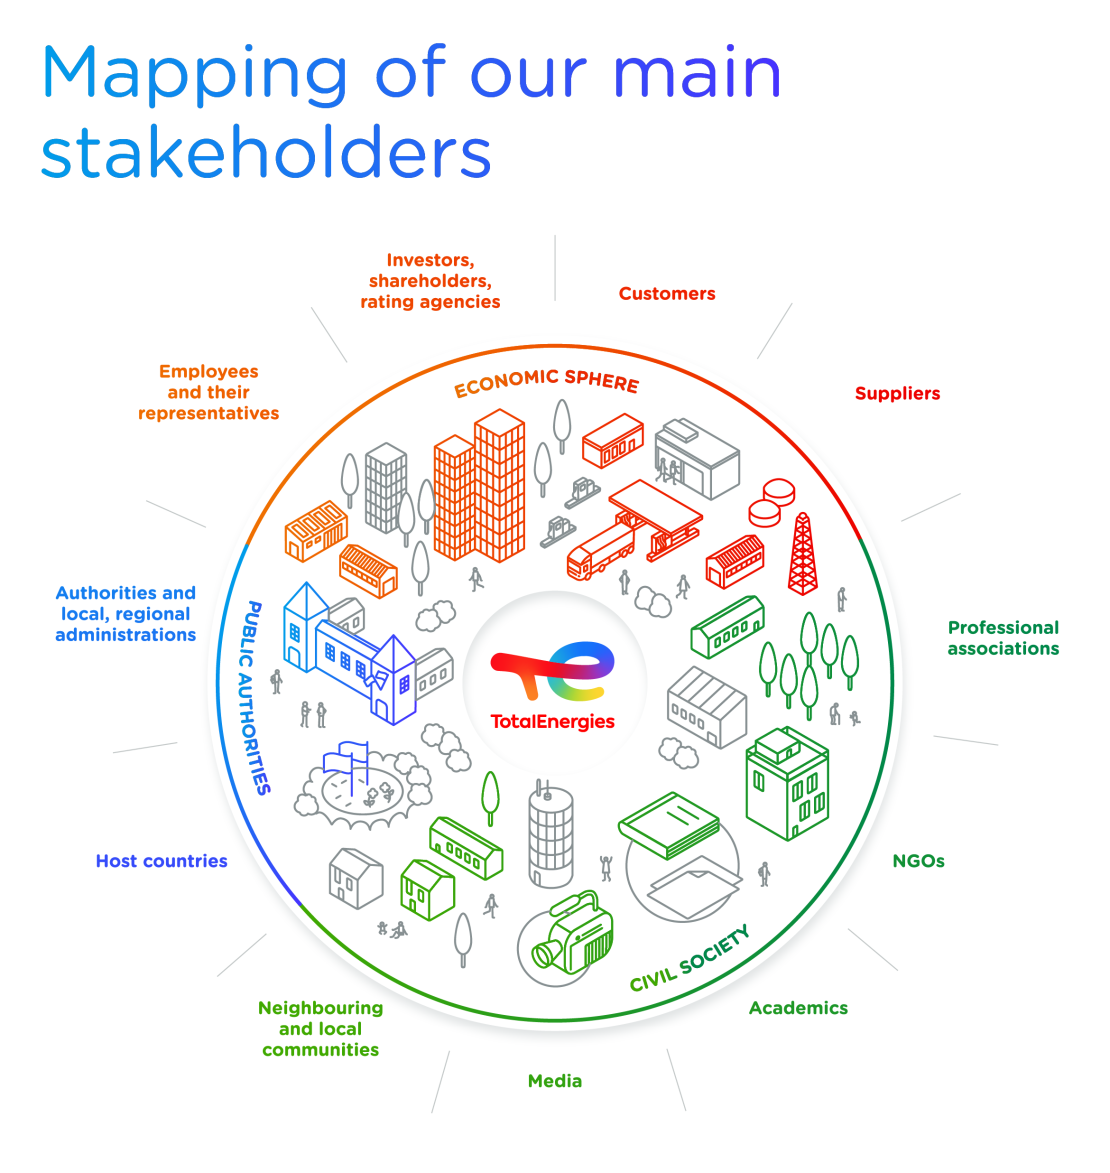 Infographics "Mapping of our main stakeholders" - see detailed description hereafter